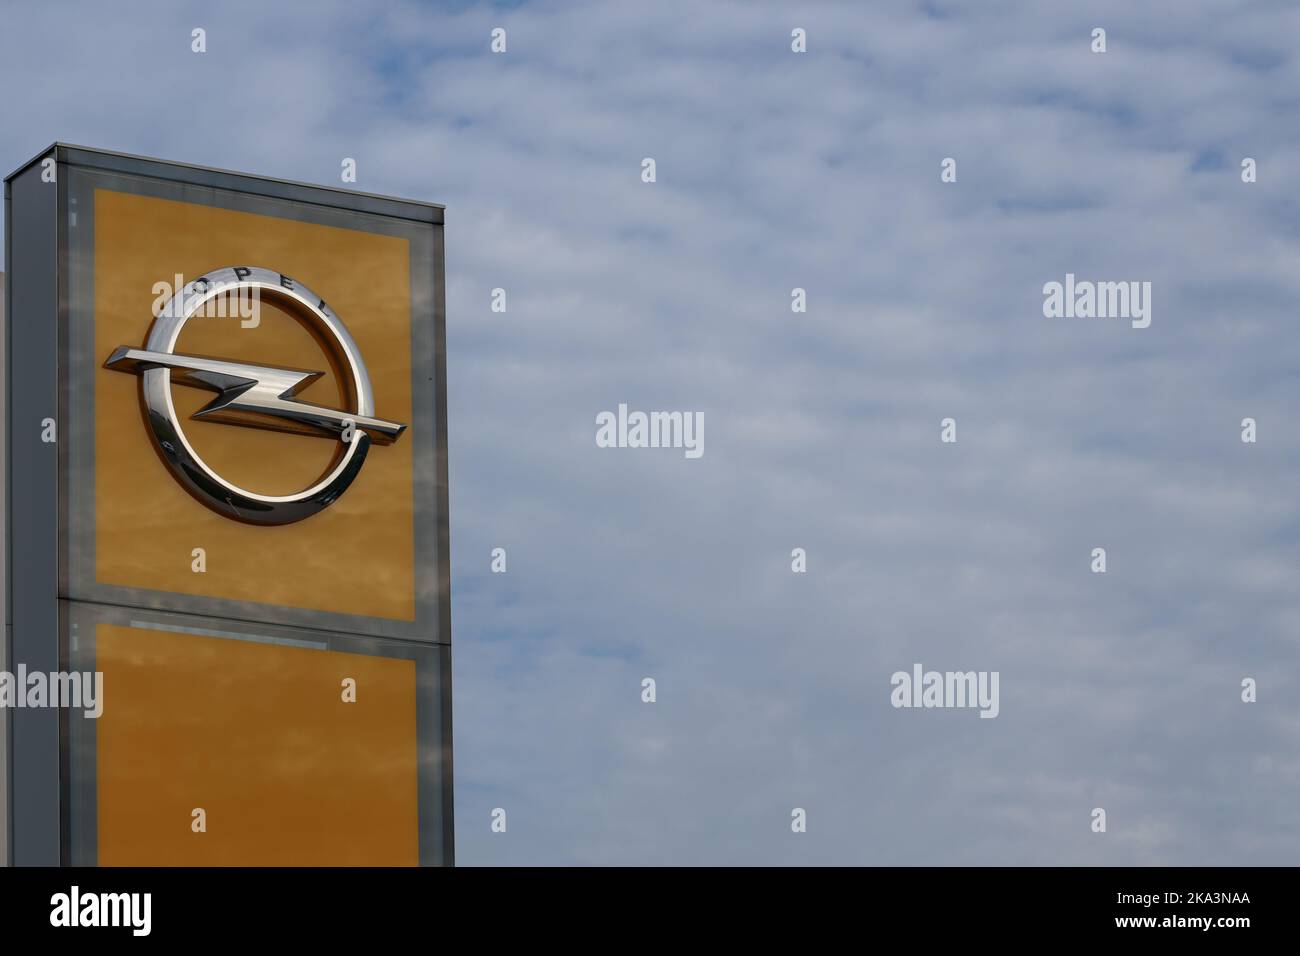 Poland, Poznan - October 30, 2022: Opel logo outside the car showroom area, against a blue sky with clouds. It is the symbol of the German internation Stock Photo